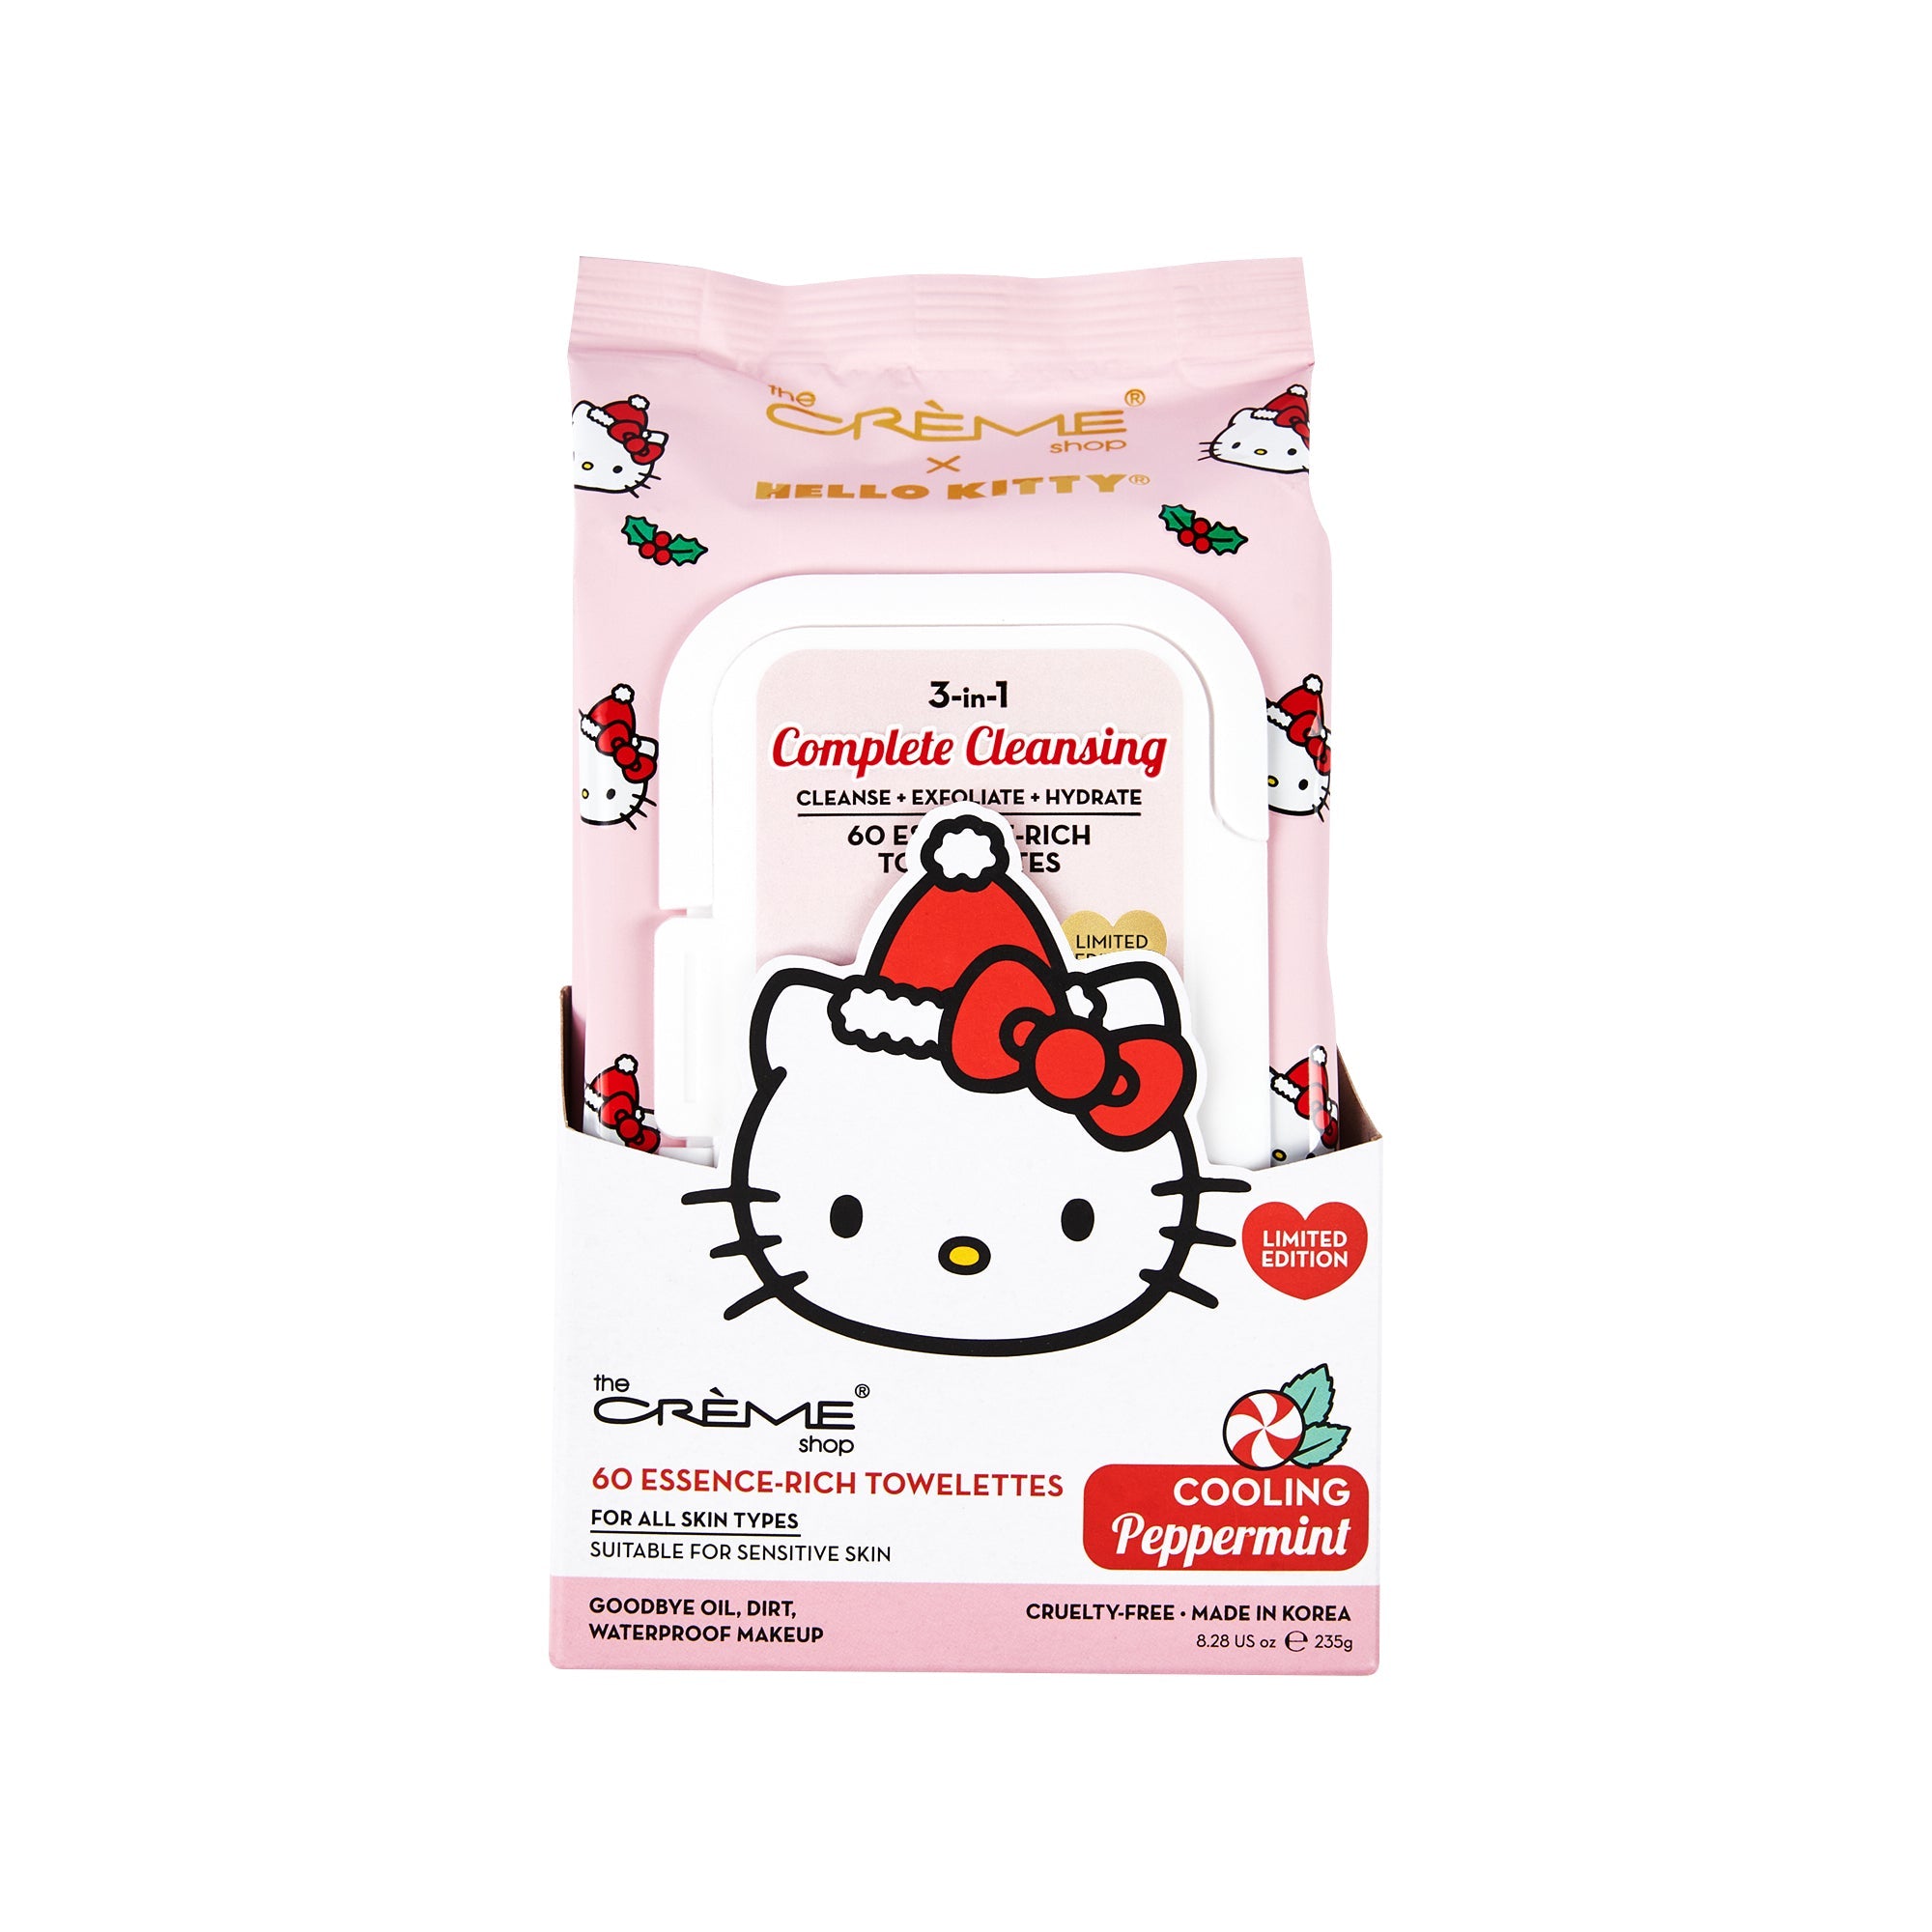 Hello Kitty 3-IN-1 Complete Cleansing Essence-Rich Towelettes - Cooling Peppermint Socks The Crème Shop x Sanrio 